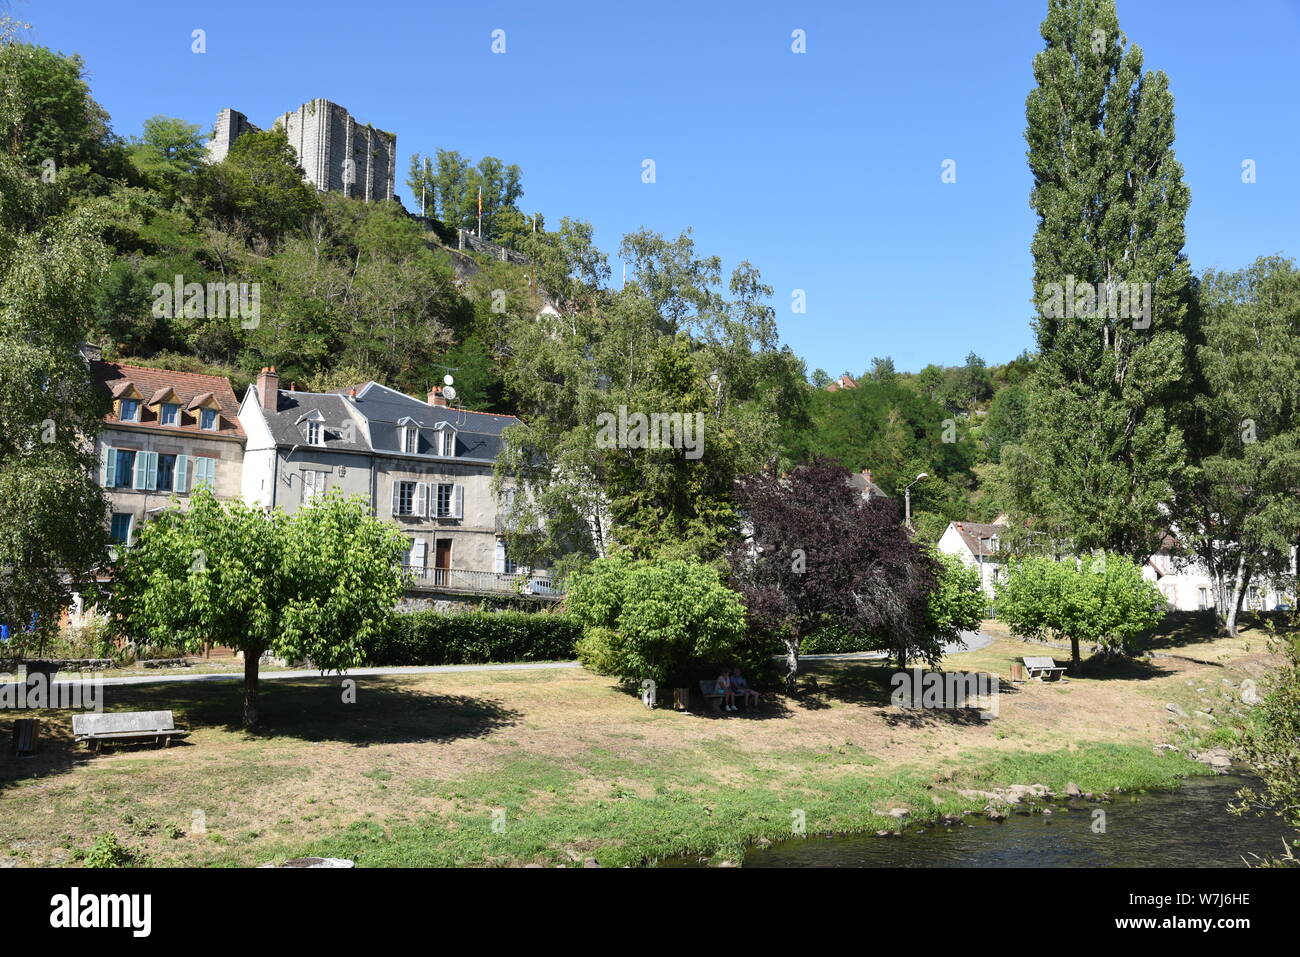 The tapestry capital of Aubusson on the River Creuse, Nouvelle-Aquitaine, France Stock Photo